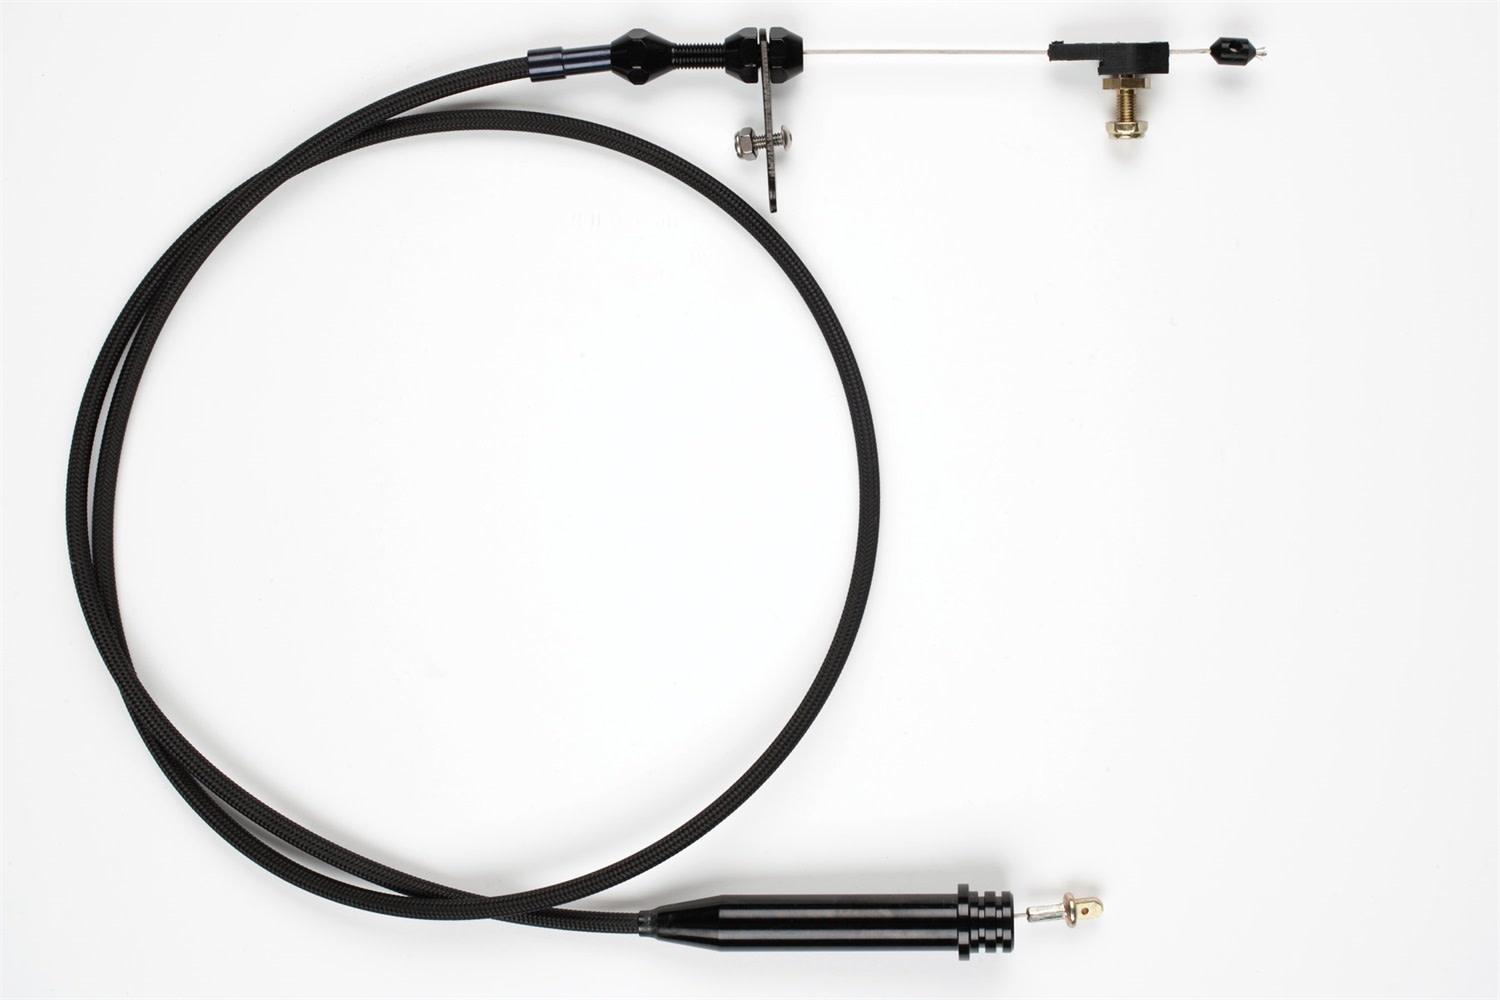 TUNED-PORT CHEVY/GM 700R4 TRANSMISSION KICKDOWN CABLE KIT 